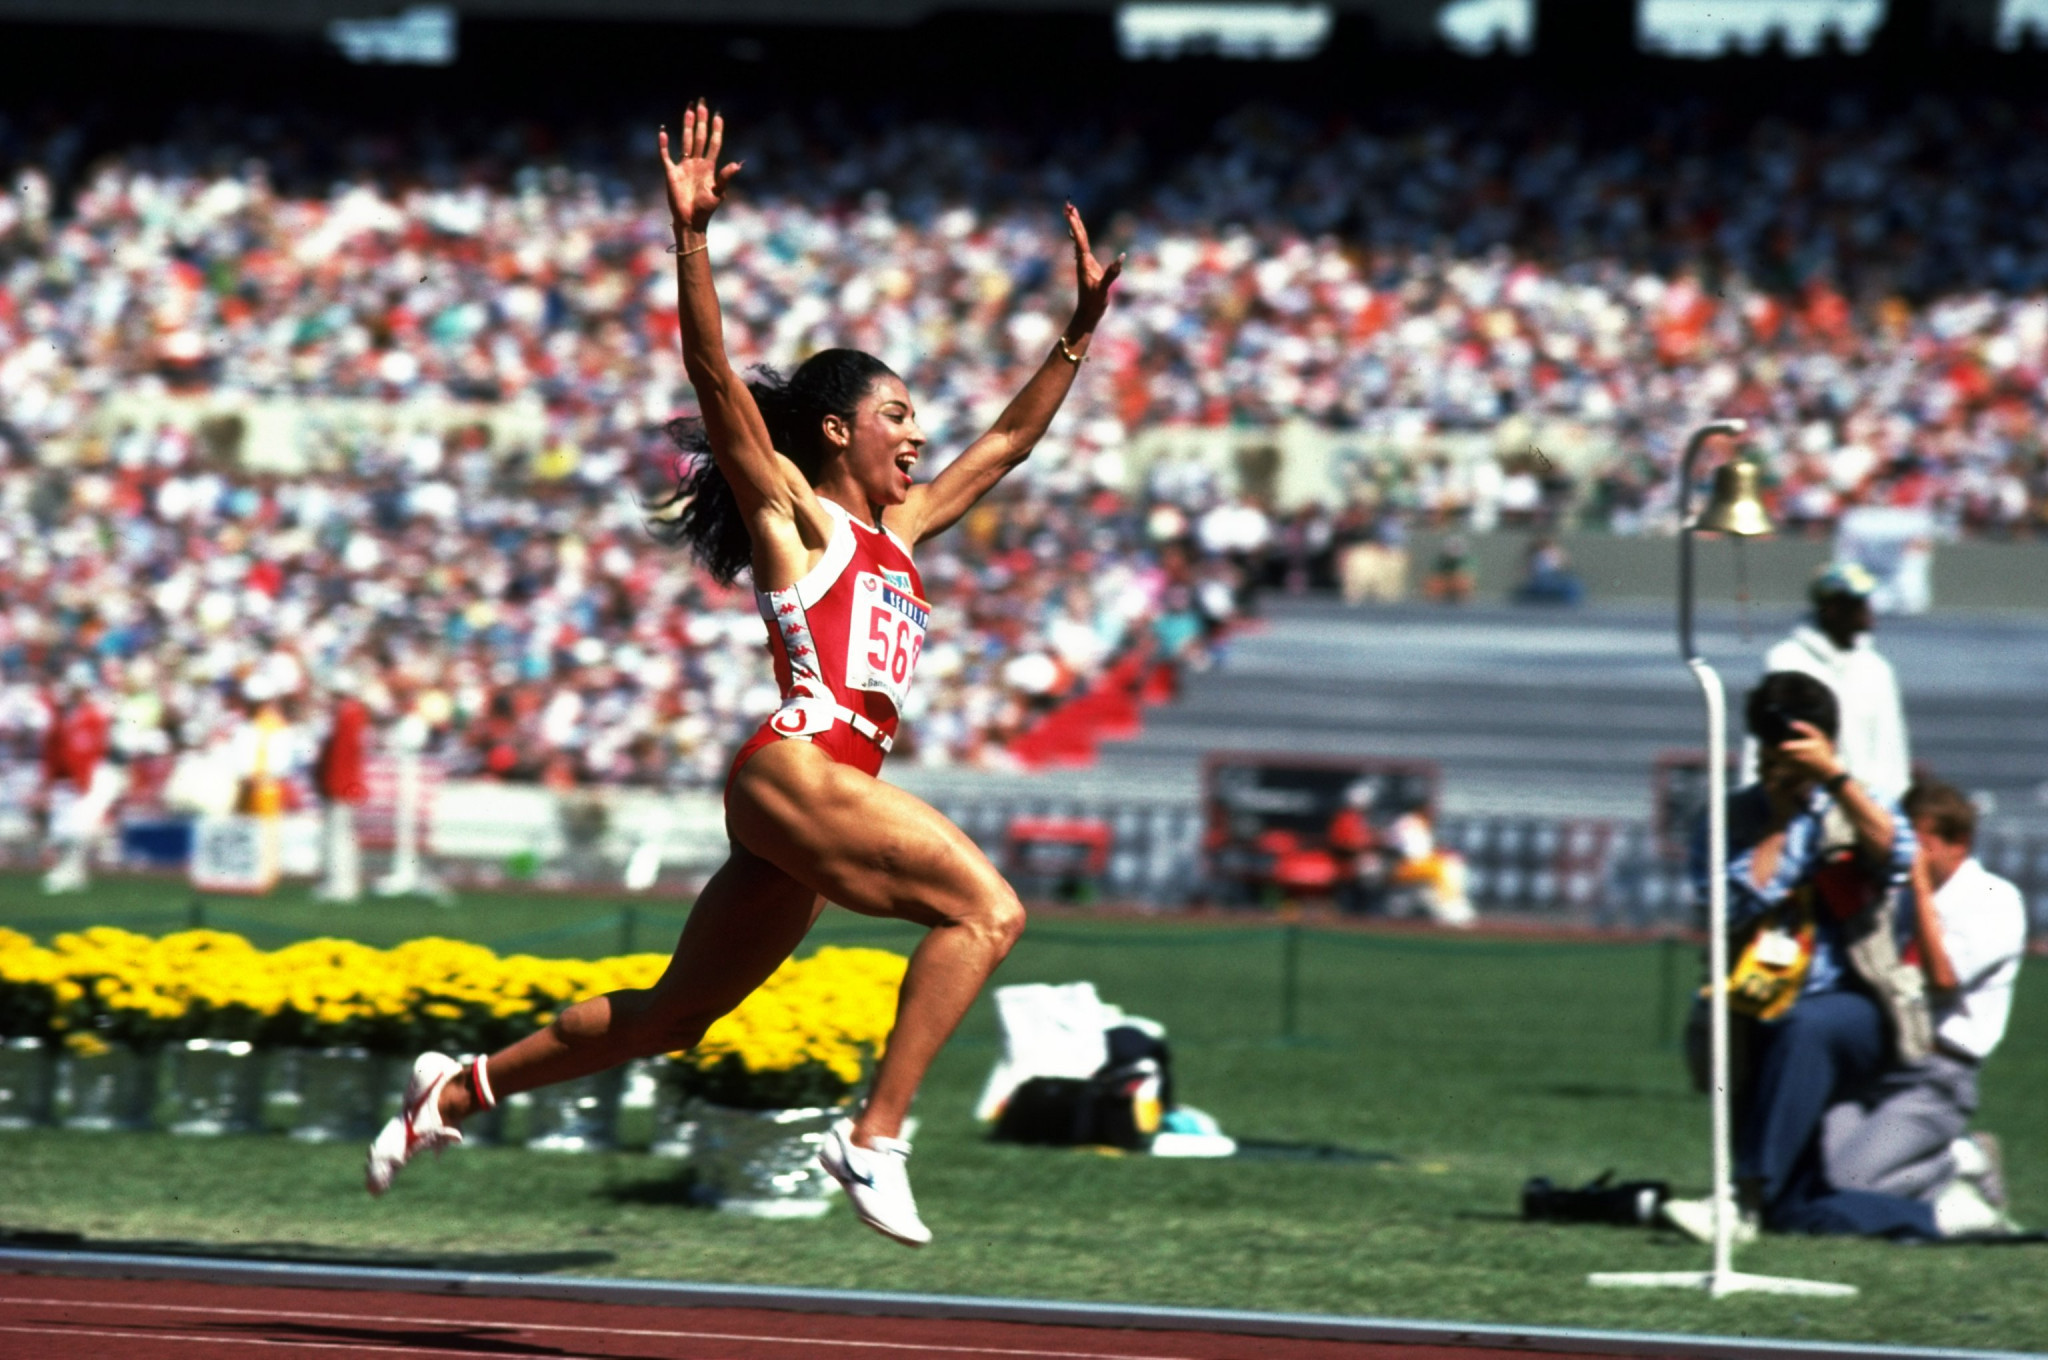 Florence Griffith-Joyner holds the women's 100m and 200m world records, but the performances have been viewed with suspicion ©Getty Images